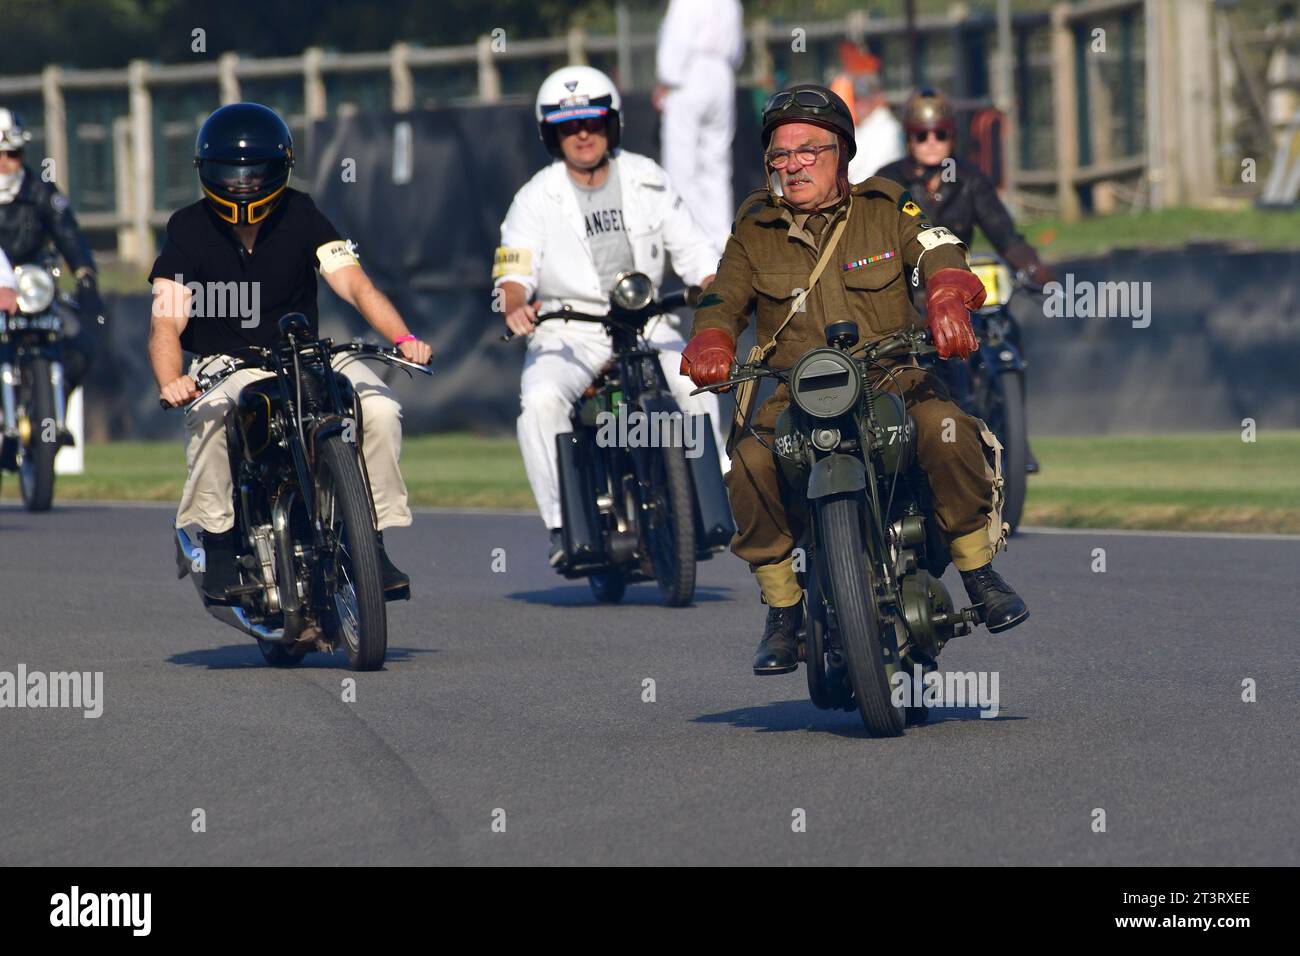 Military motorcycle, Track Parade - Motorcycle Celebration, circa 200 bikes featured in the morning parade laps, including sidecar outfits and motor t Stock Photo